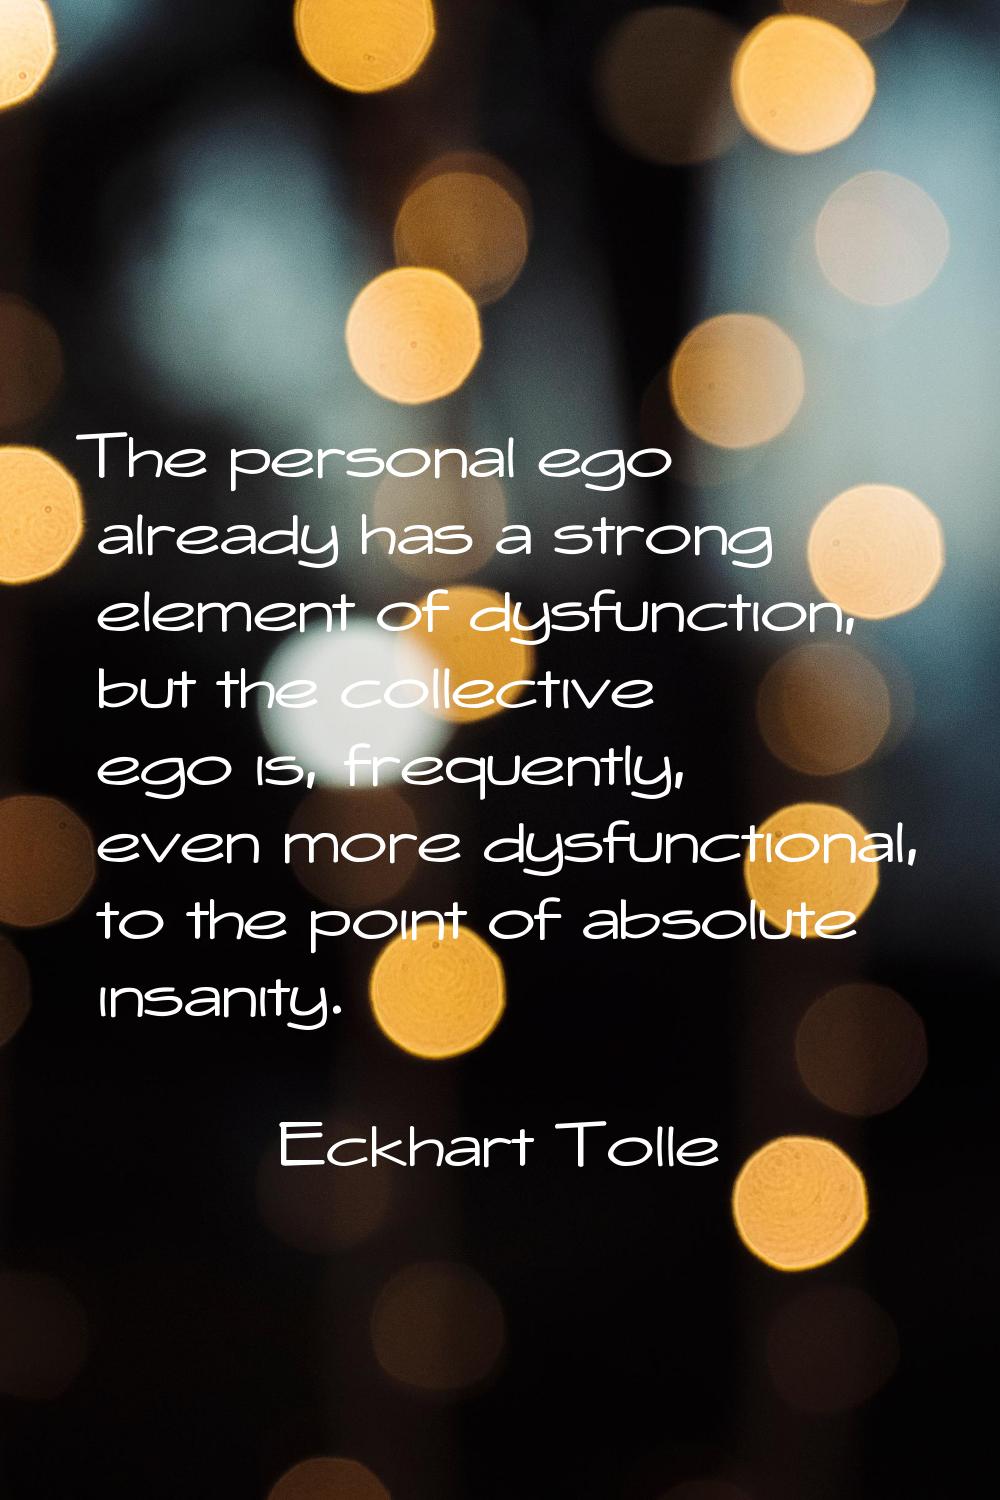 The personal ego already has a strong element of dysfunction, but the collective ego is, frequently